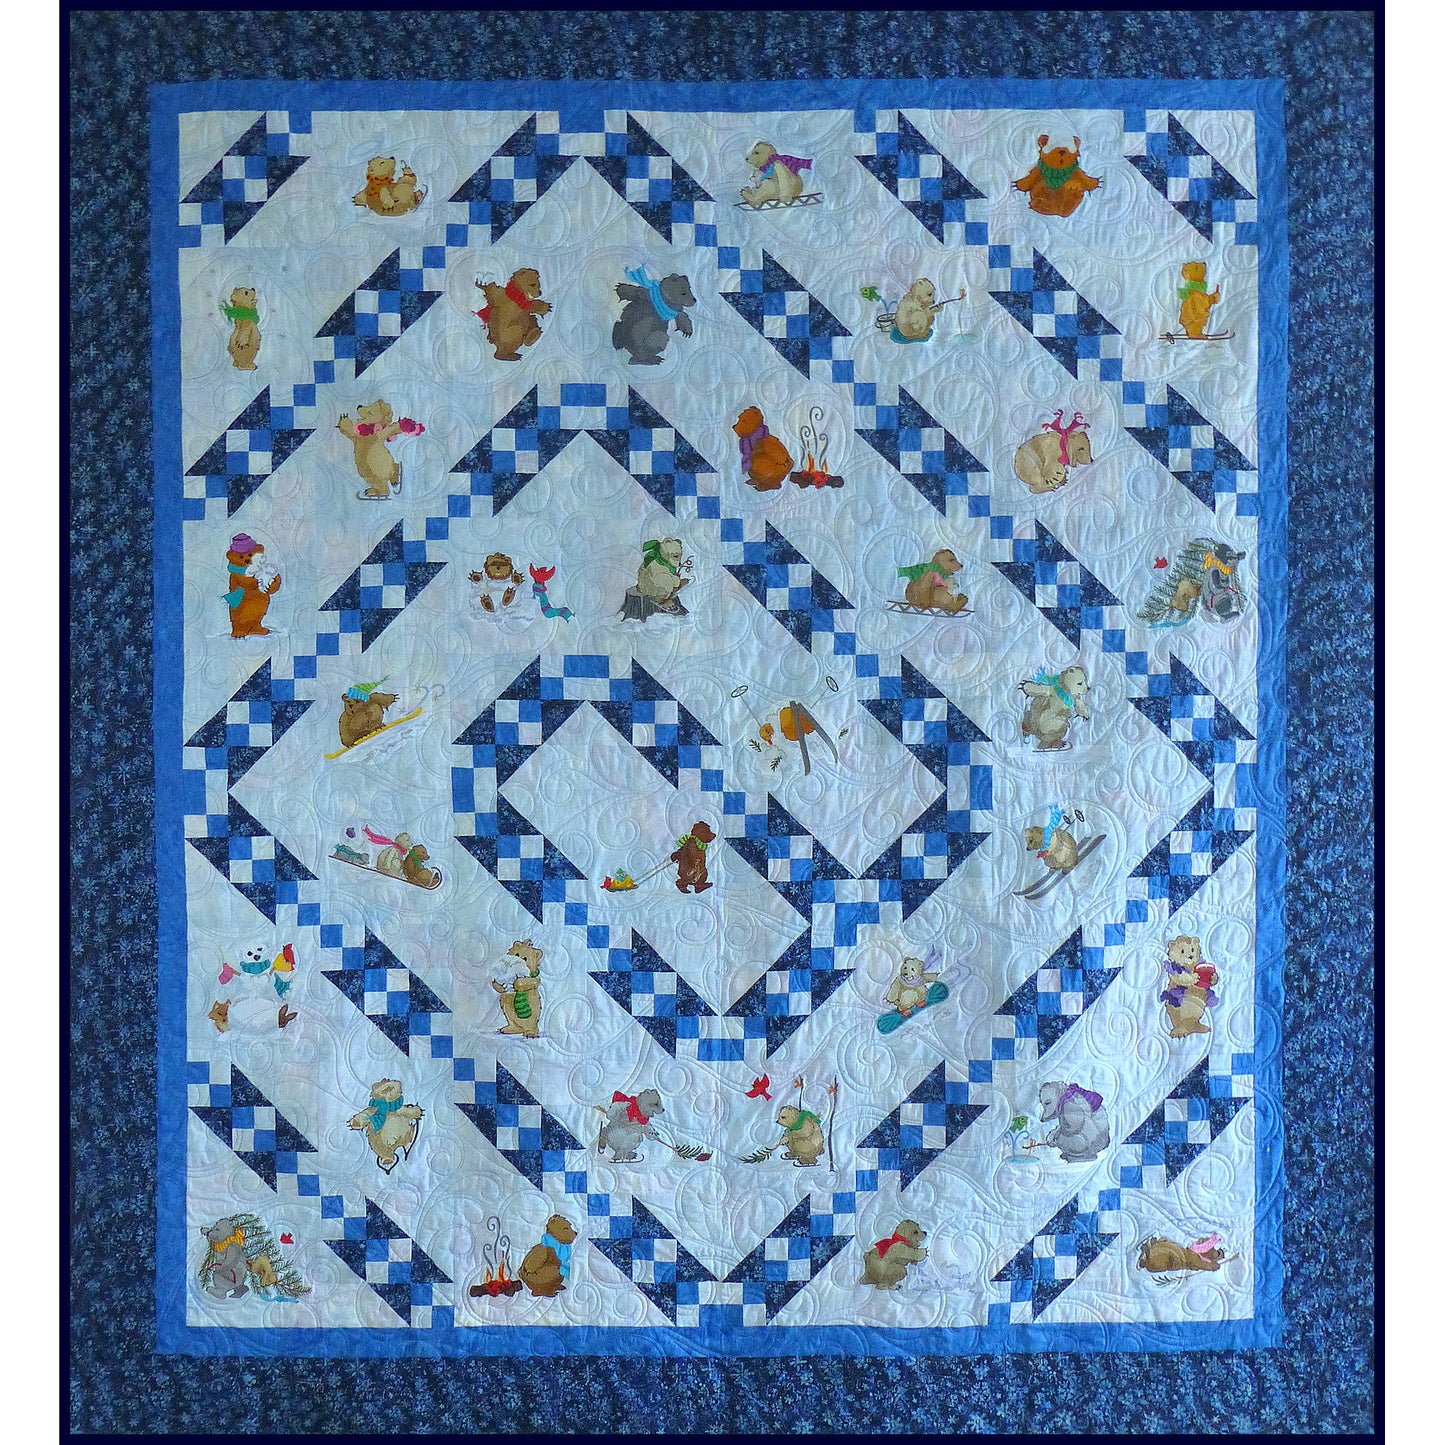 Simply Does It! Quilt SS-106e- Downloadable Pattern